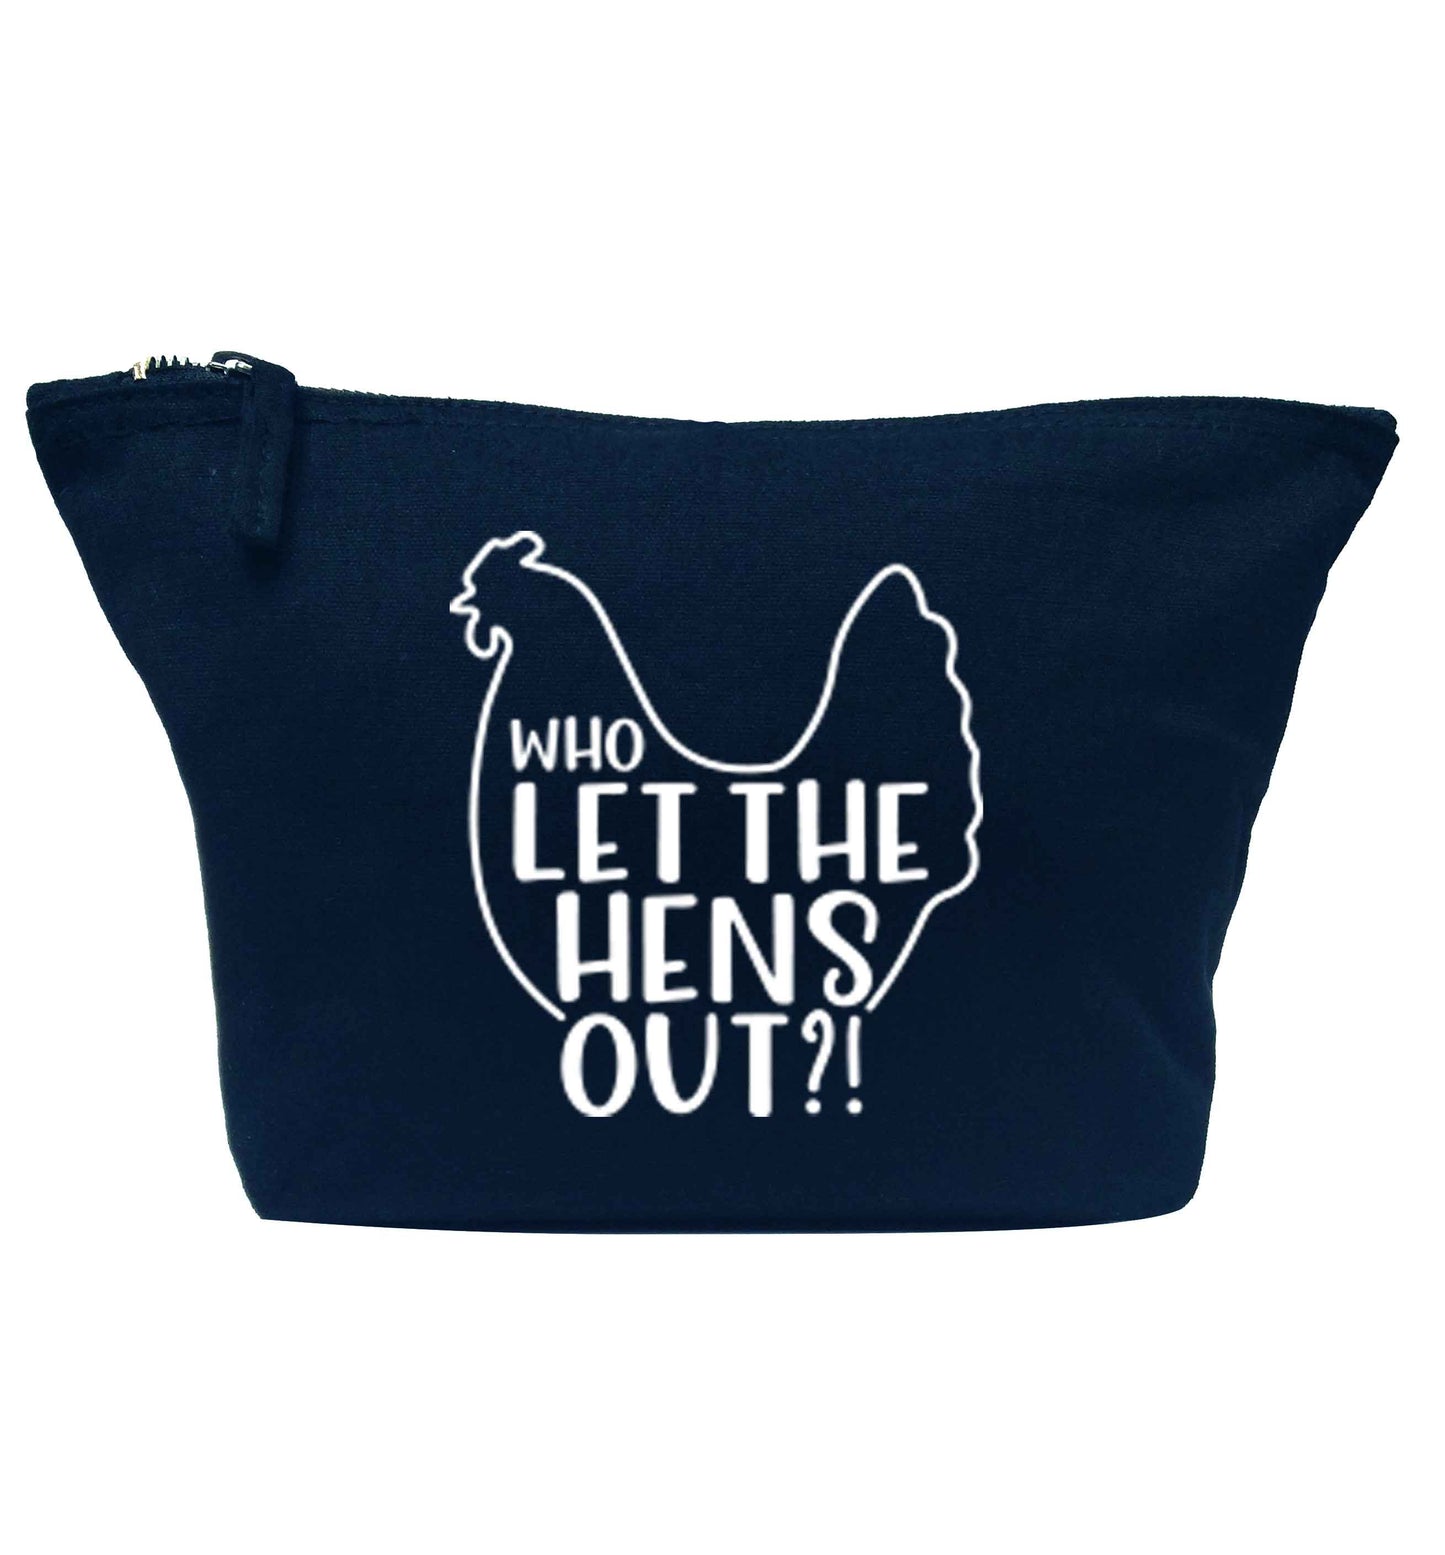 Who let the hens out navy makeup bag